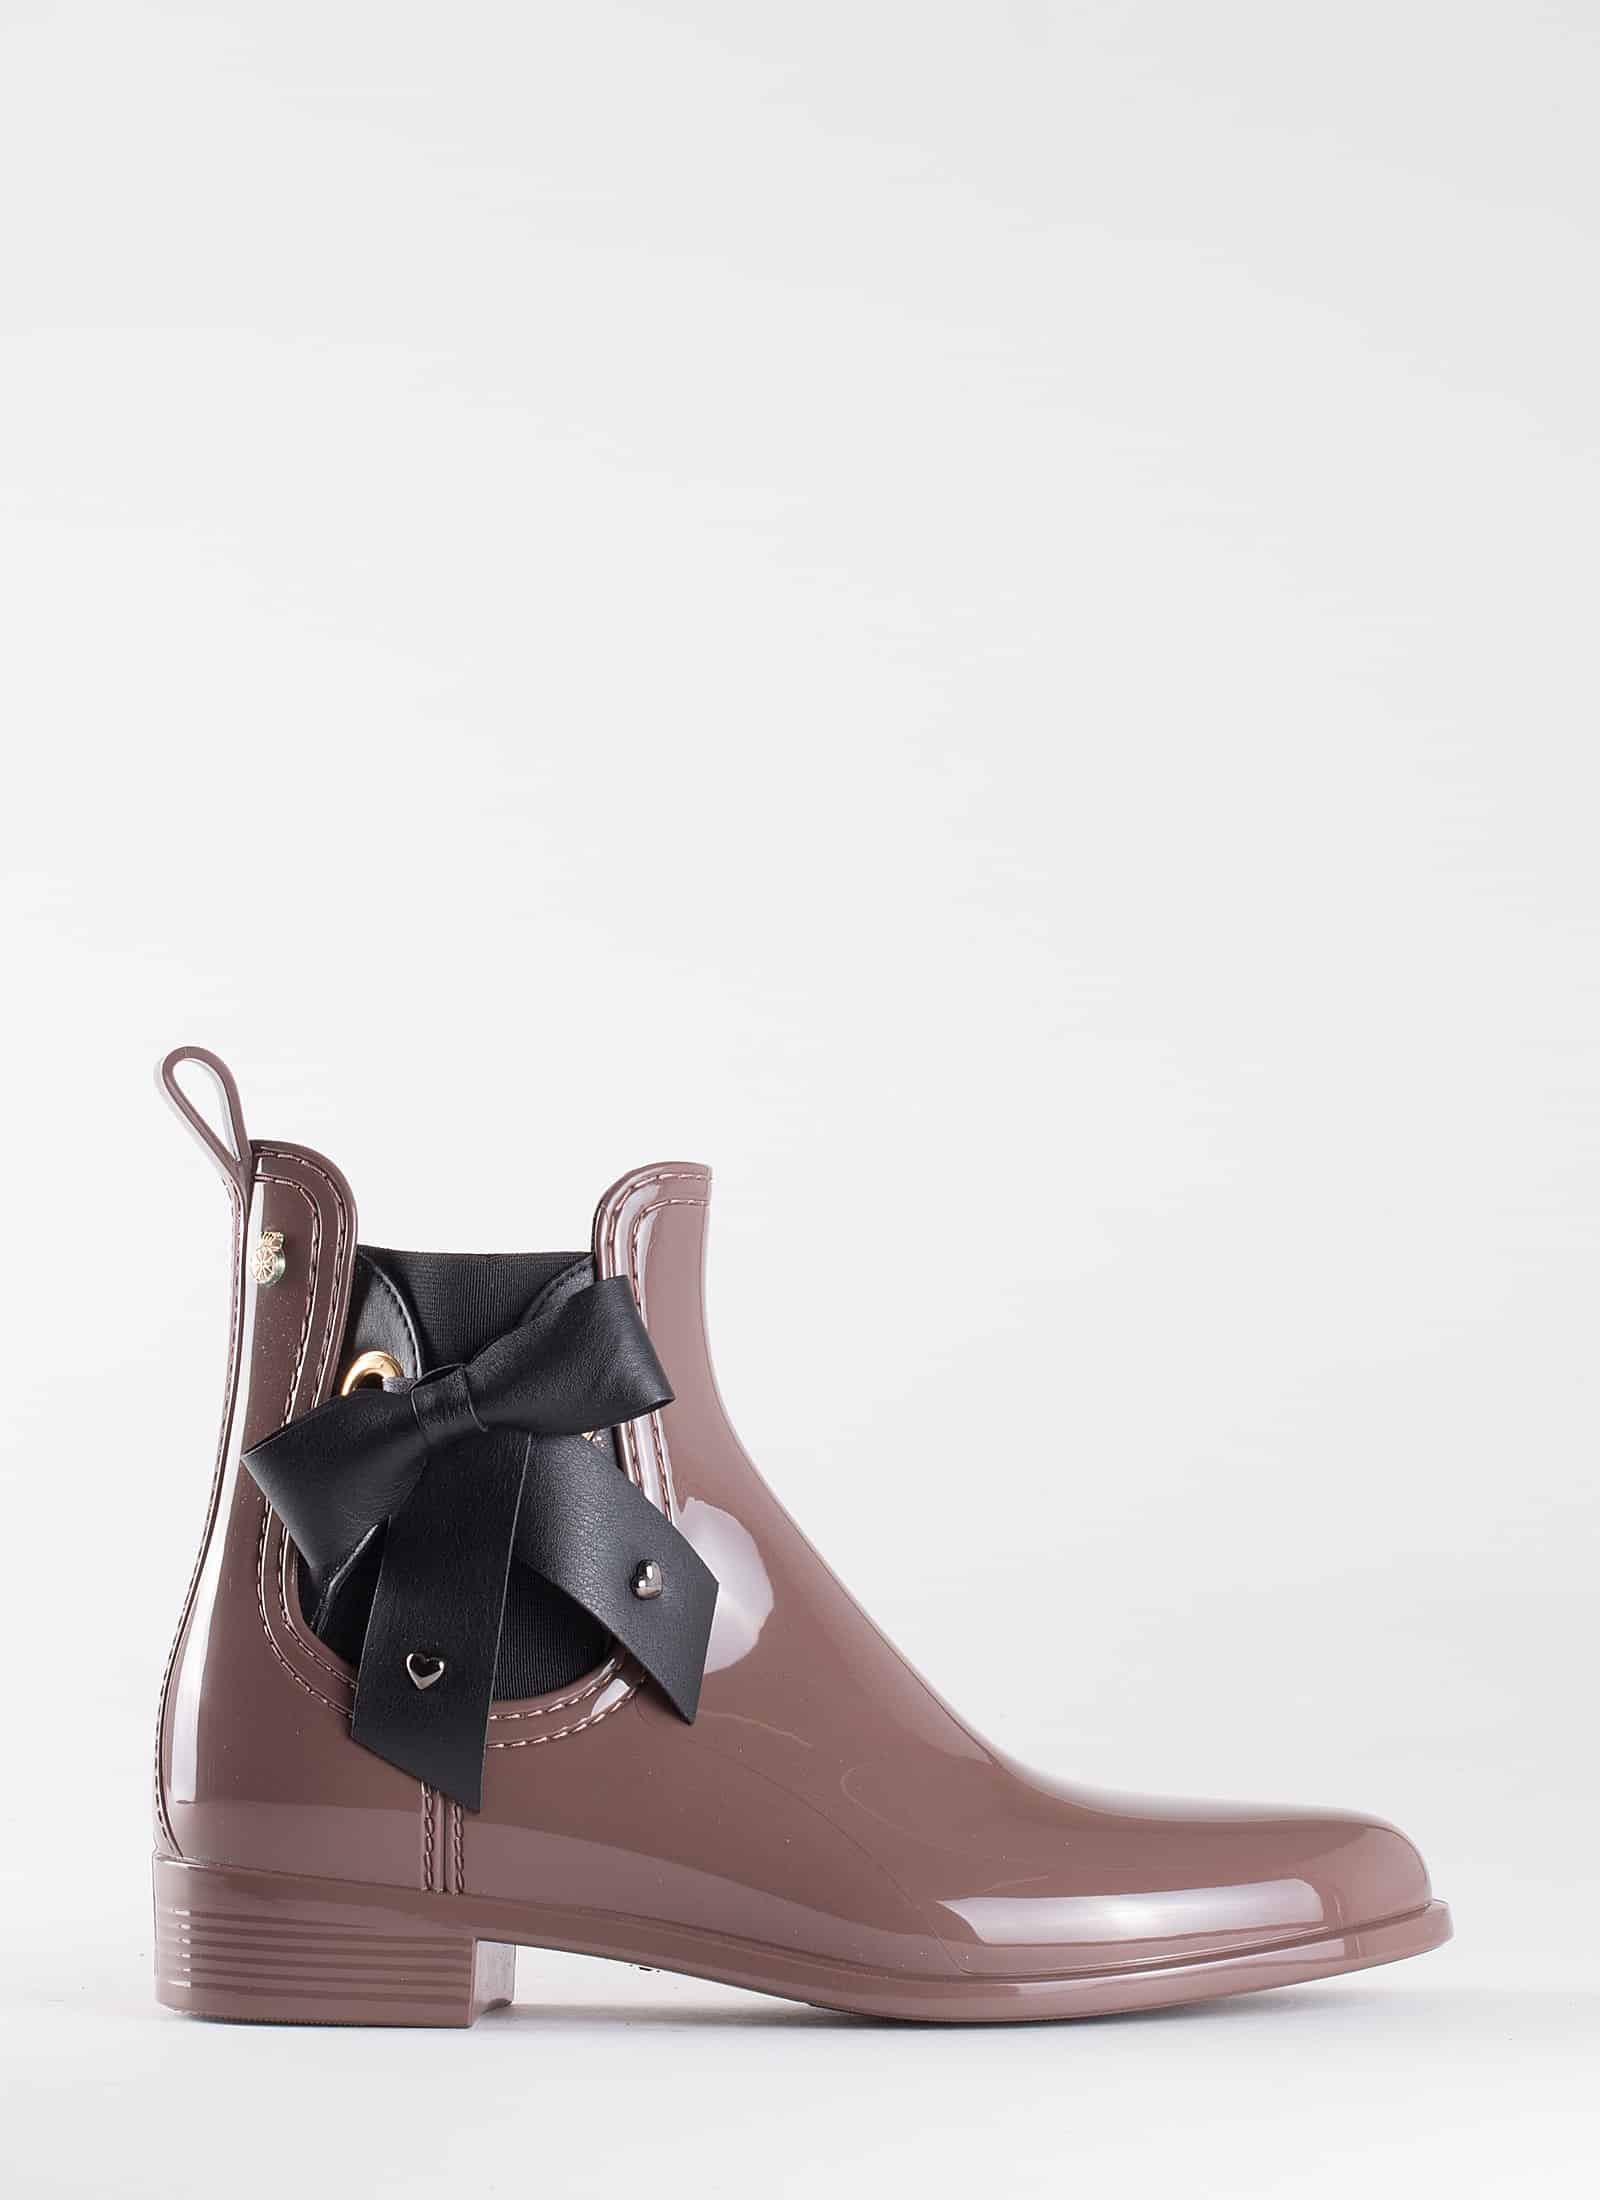 SILICONE CHELSEA BOOTS - LEMON JELLY